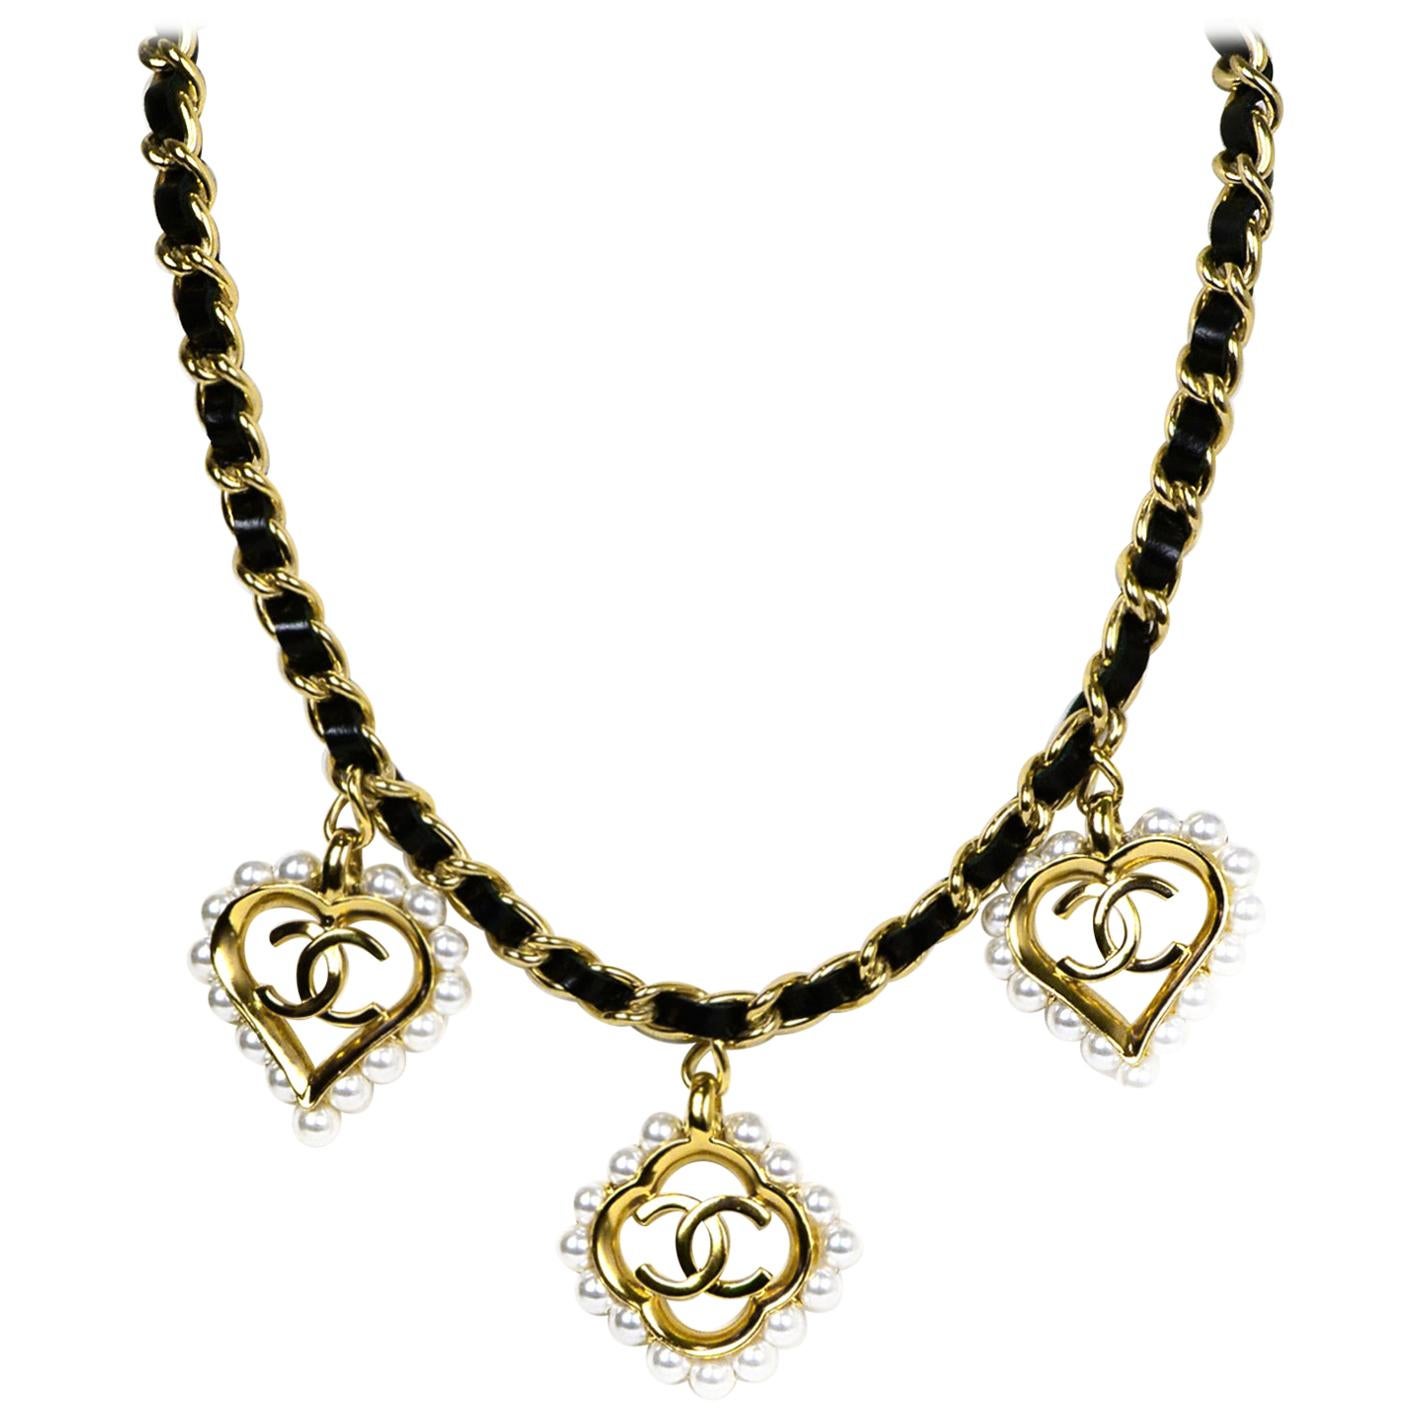 Chanel 2019 Leather Laced Chain Necklace w/ Faux Pearl Heart & Flower CC Charms